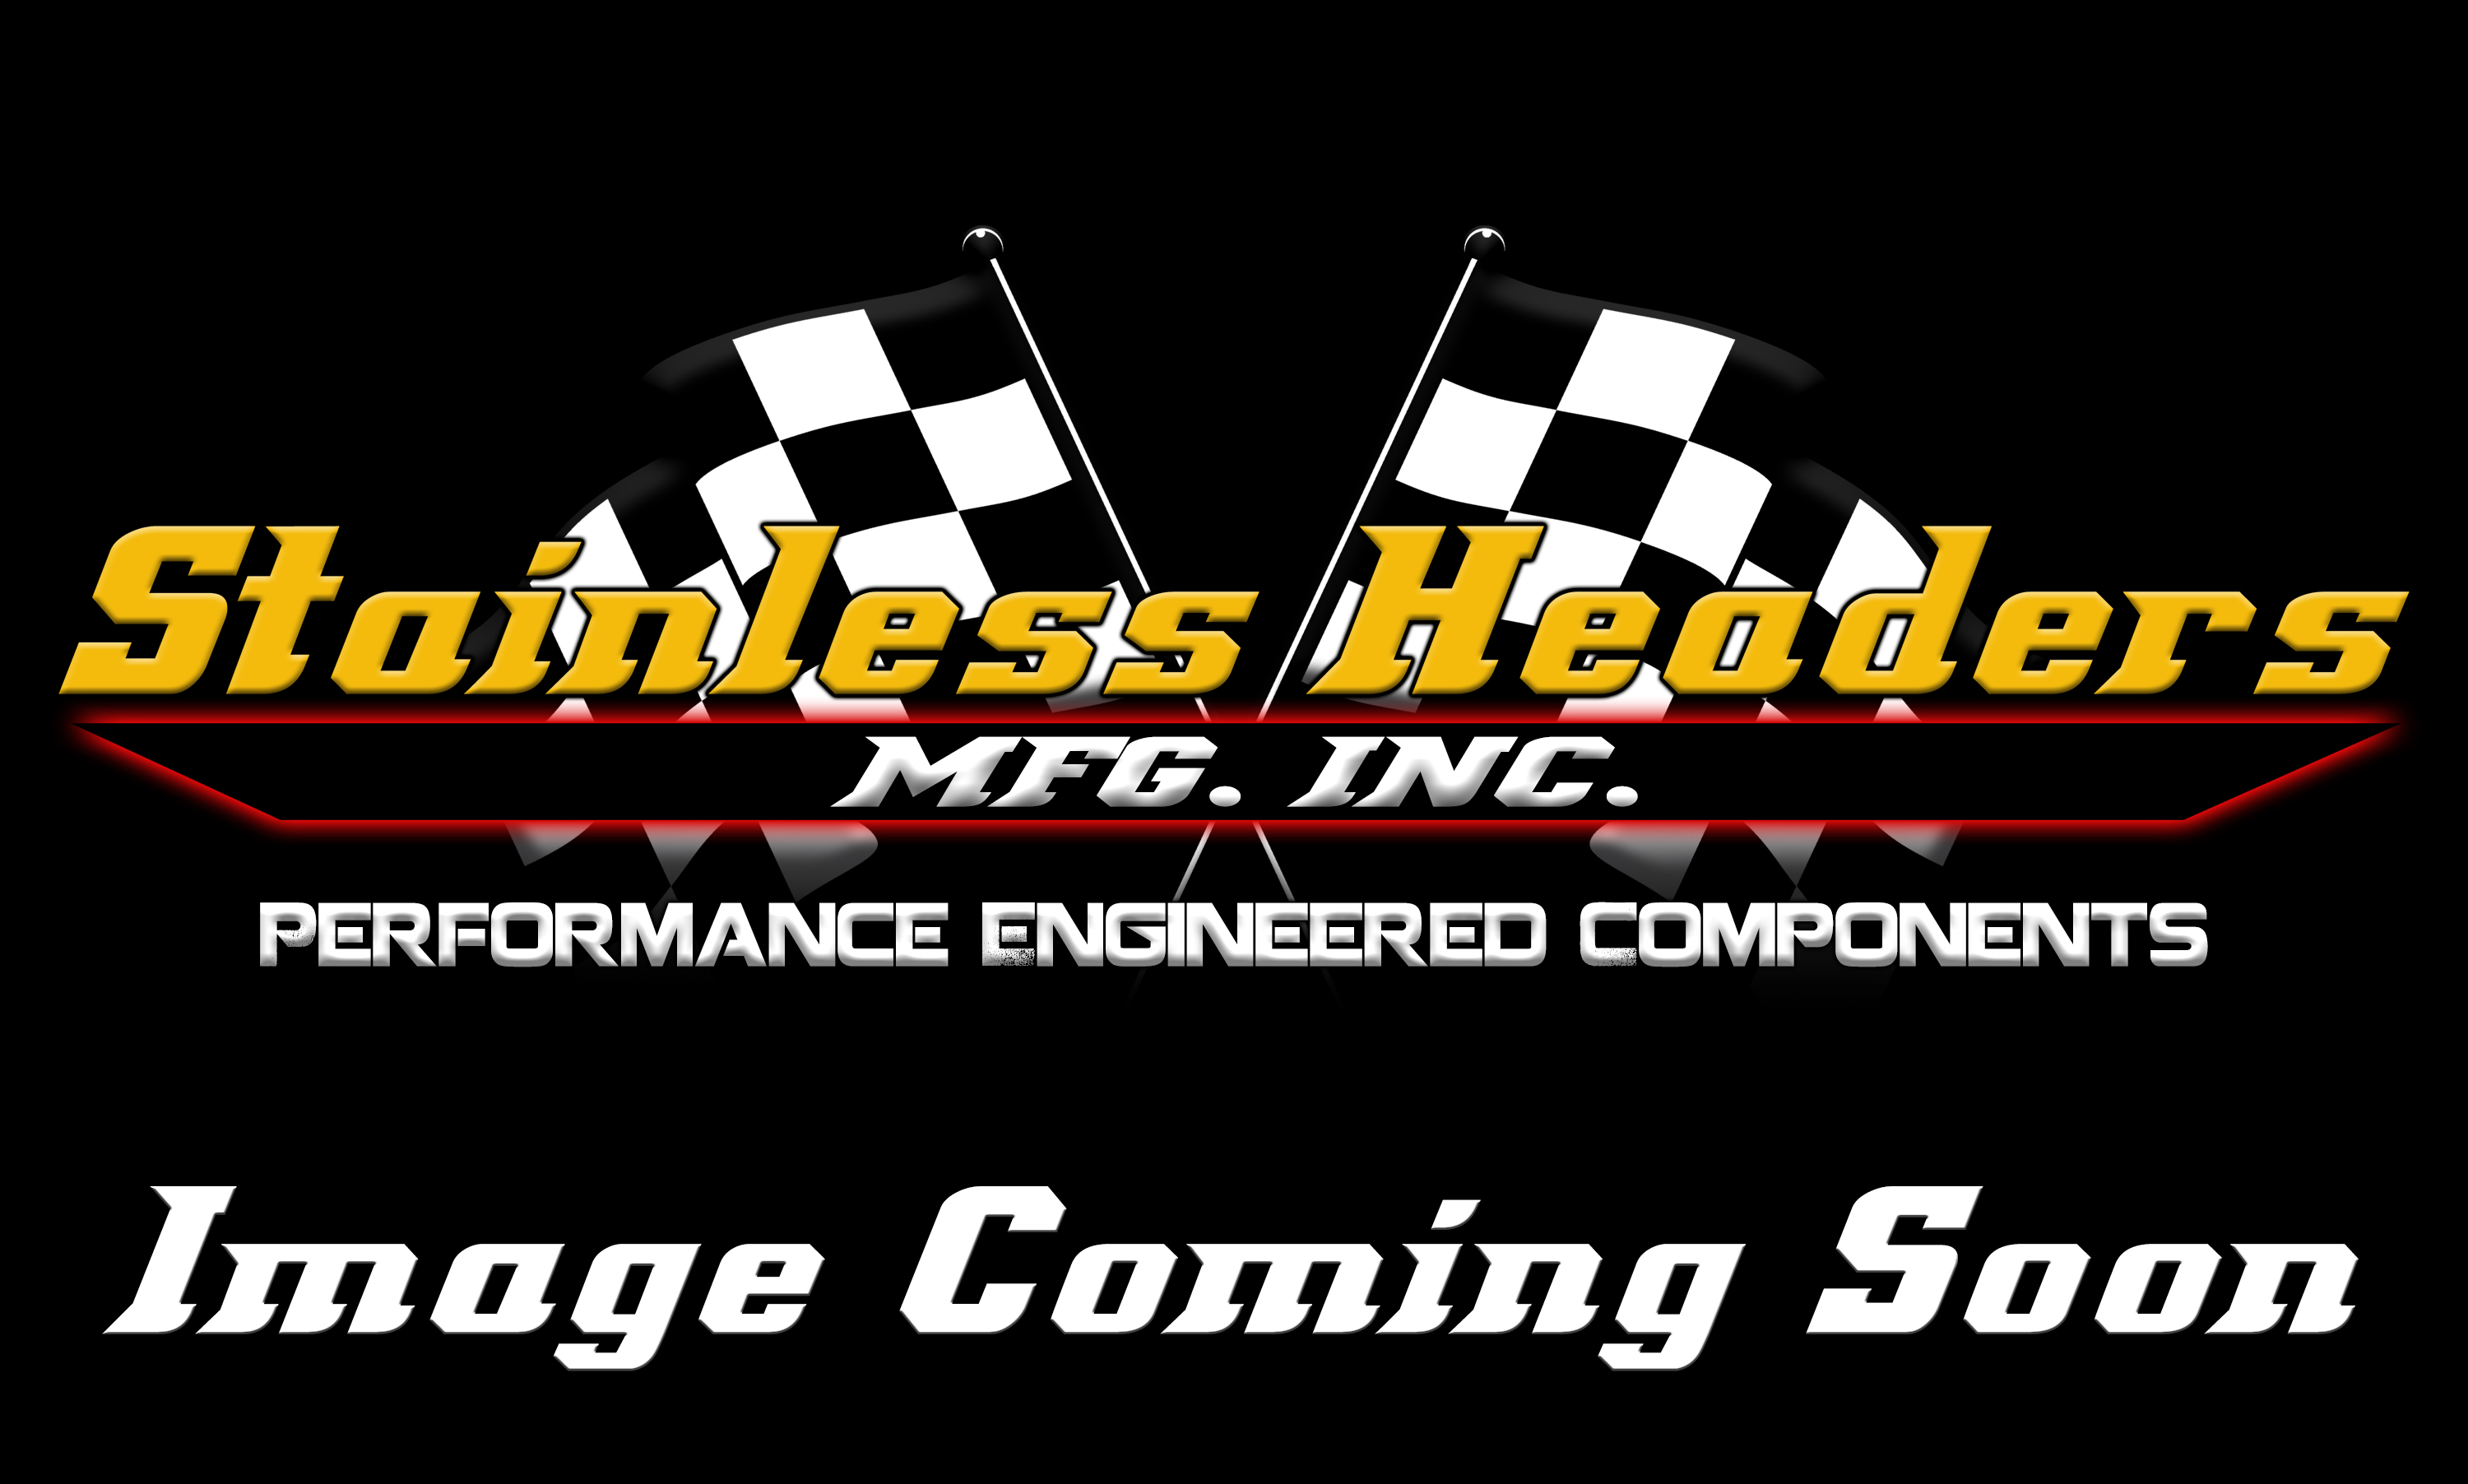 CompTurbo Technologies - CTR4202R-7285 Mid Frame 360 Journal Bearing Turbocharger (1250 HP) - Image 3